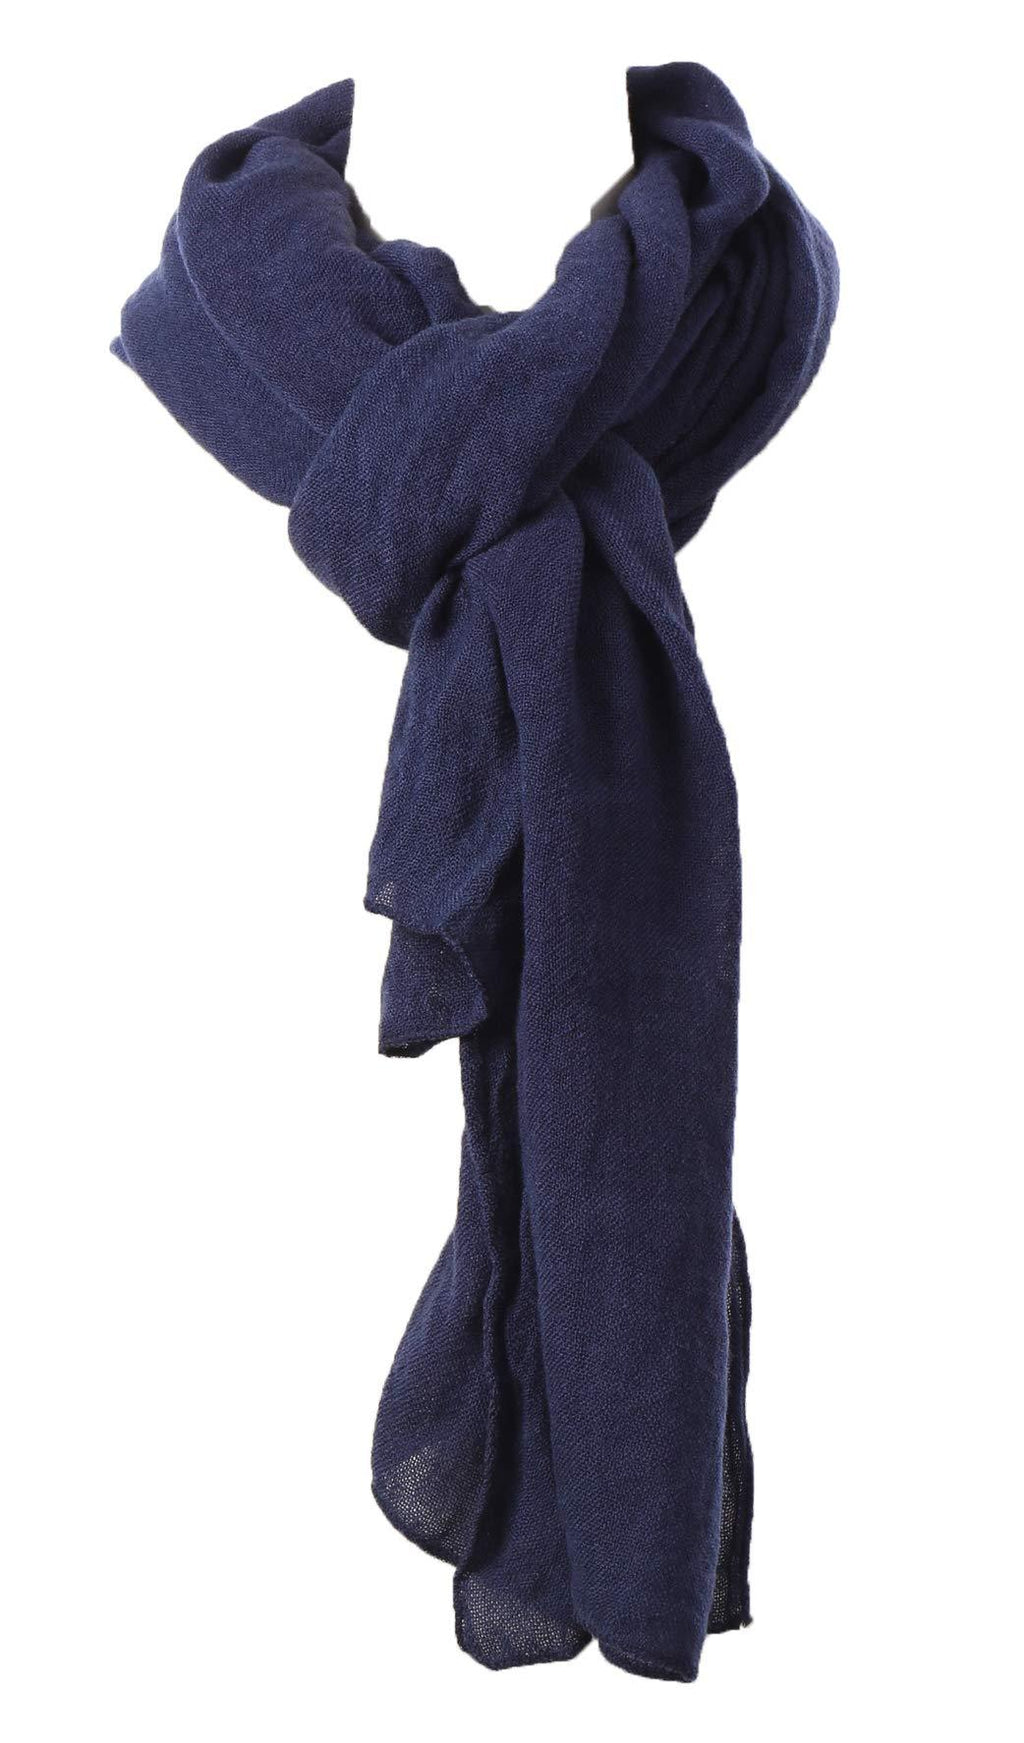 [Australia] - Jaweaver Classic Warm Soft Scarfs Women Men Large Long Pashmina Shawls and Wraps In Solid Color For Fall Winter Navy 